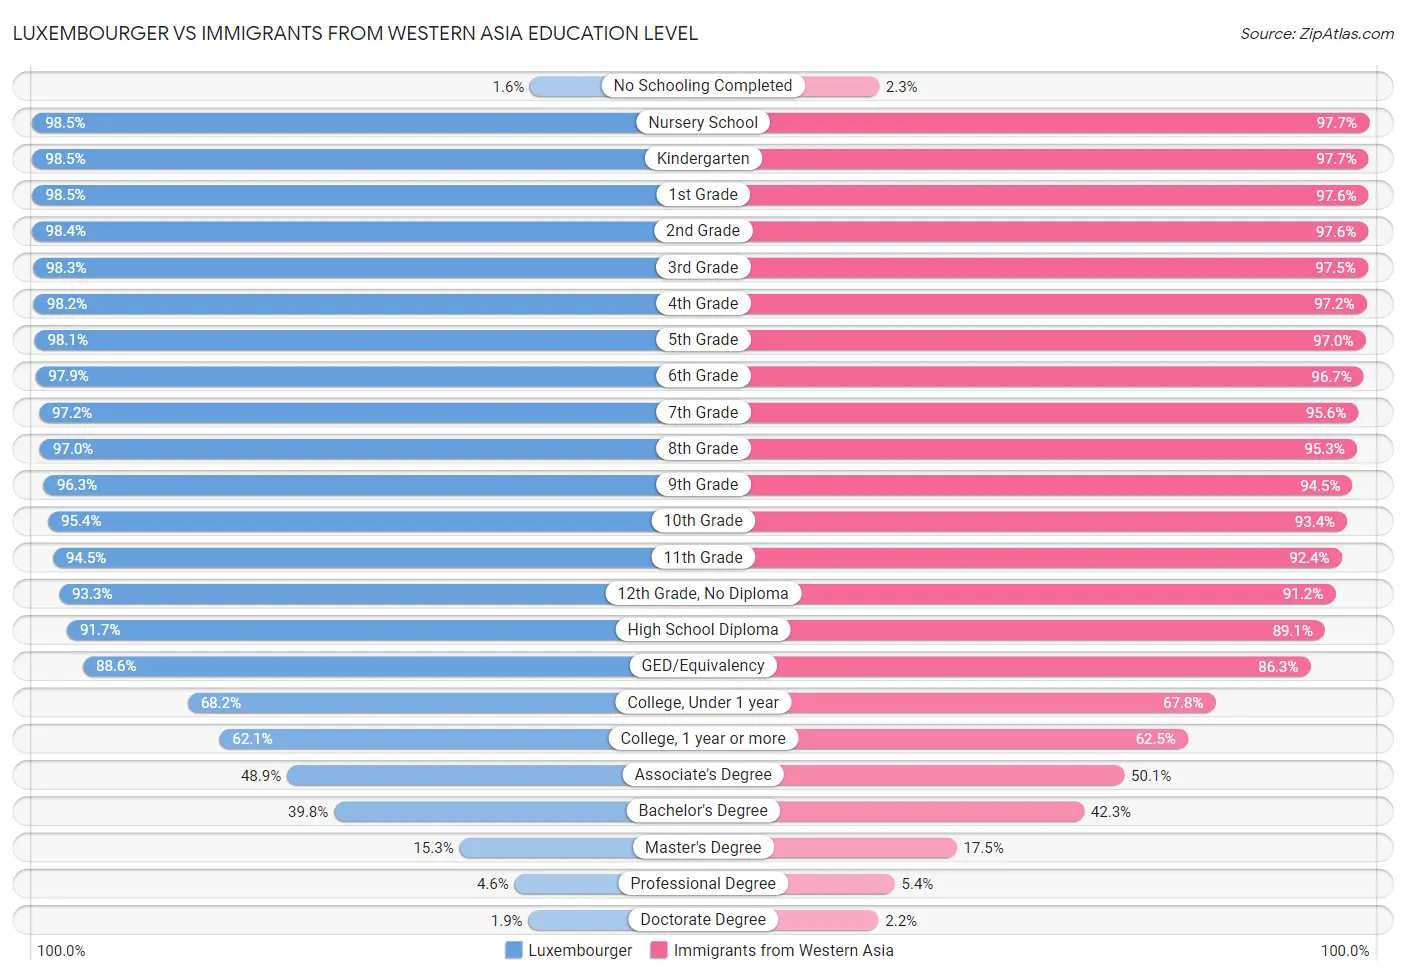 Luxembourger vs Immigrants from Western Asia Education Level